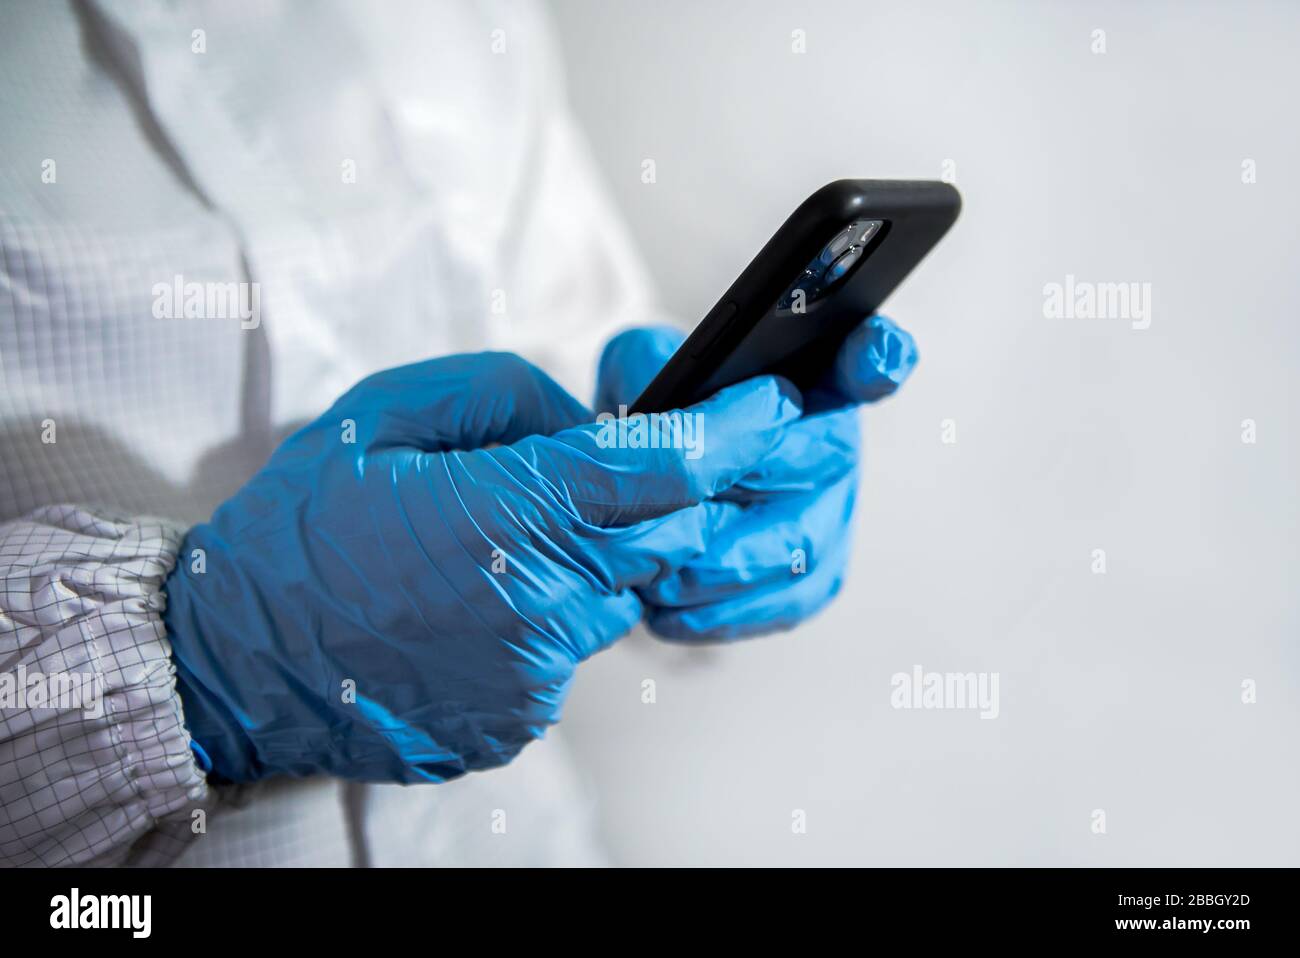 Man wearing a protective suit and blue gloves using smartphone on laboratory. Doctor using phone device. Coronavirus has caused emergency situation. C Stock Photo